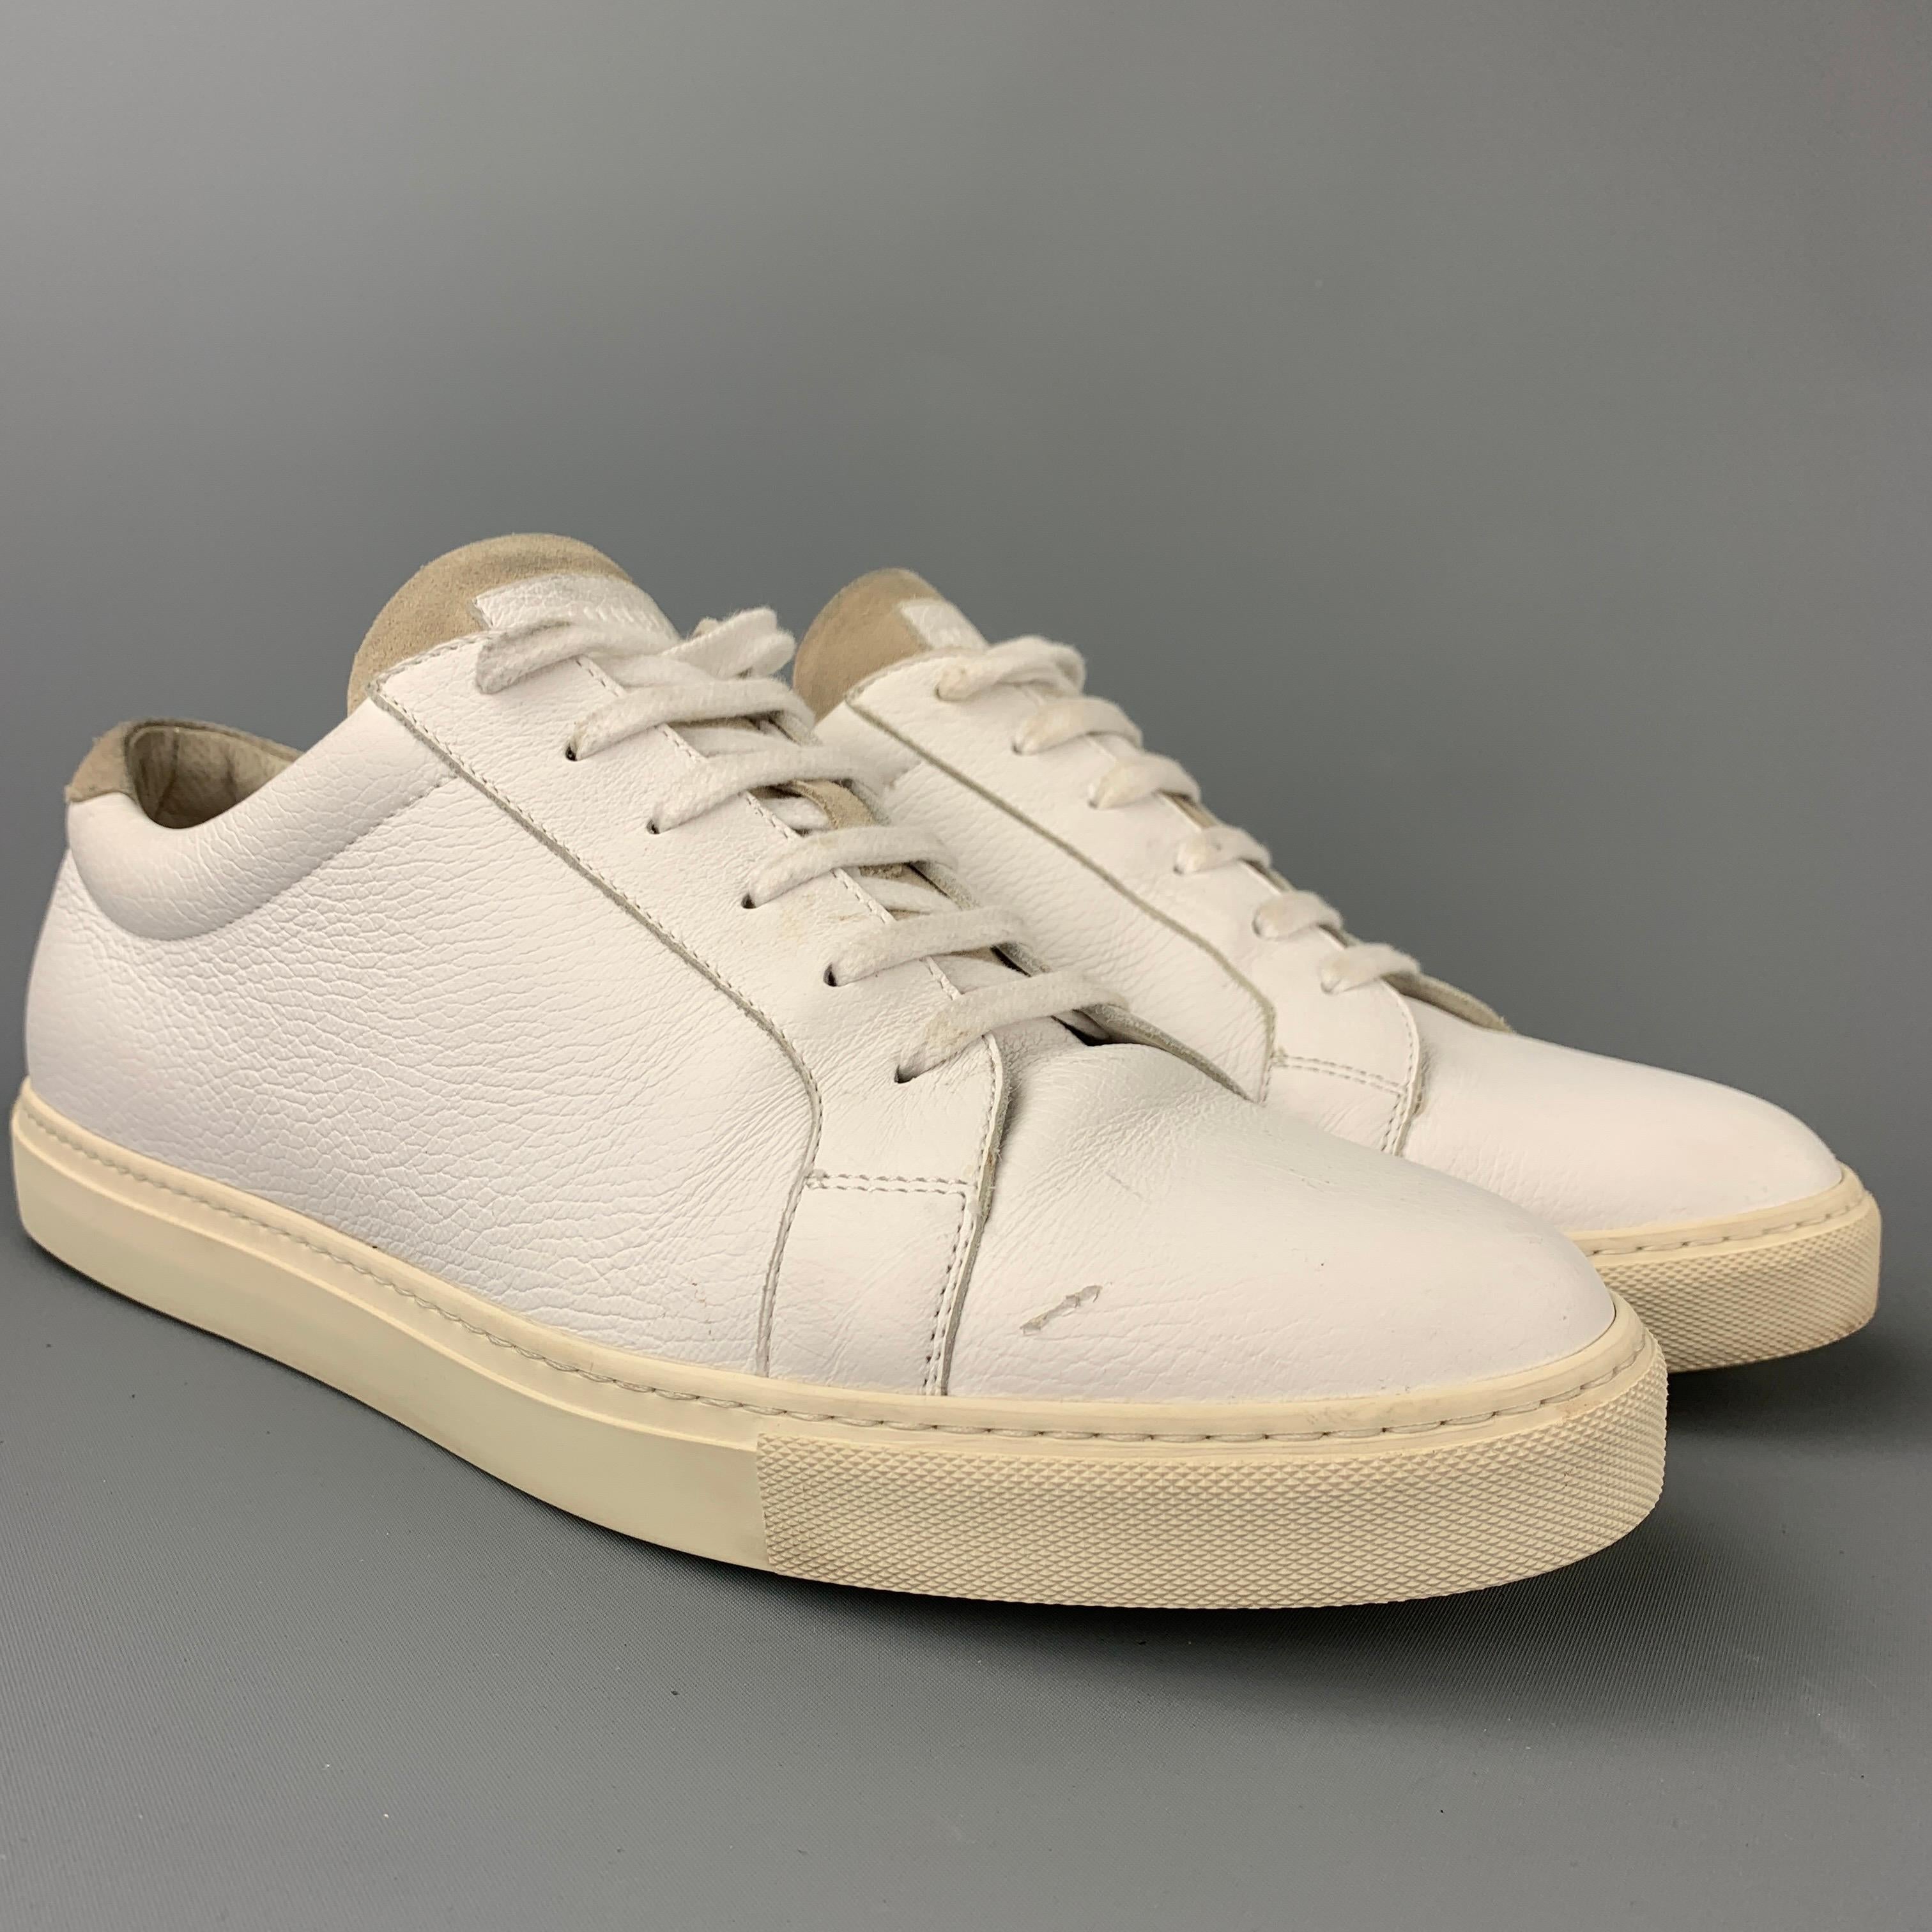 BRUNELLO CUCINELLI sneakers comes in a white leather featuring a low top style, rubber sole, and a lace up closure. Made in Italy.

Very Good Pre-Owned Condition.
Marked: EU 46
Original Retail Price: $745.00

Outsole: 12.5 in. x 4 in. 